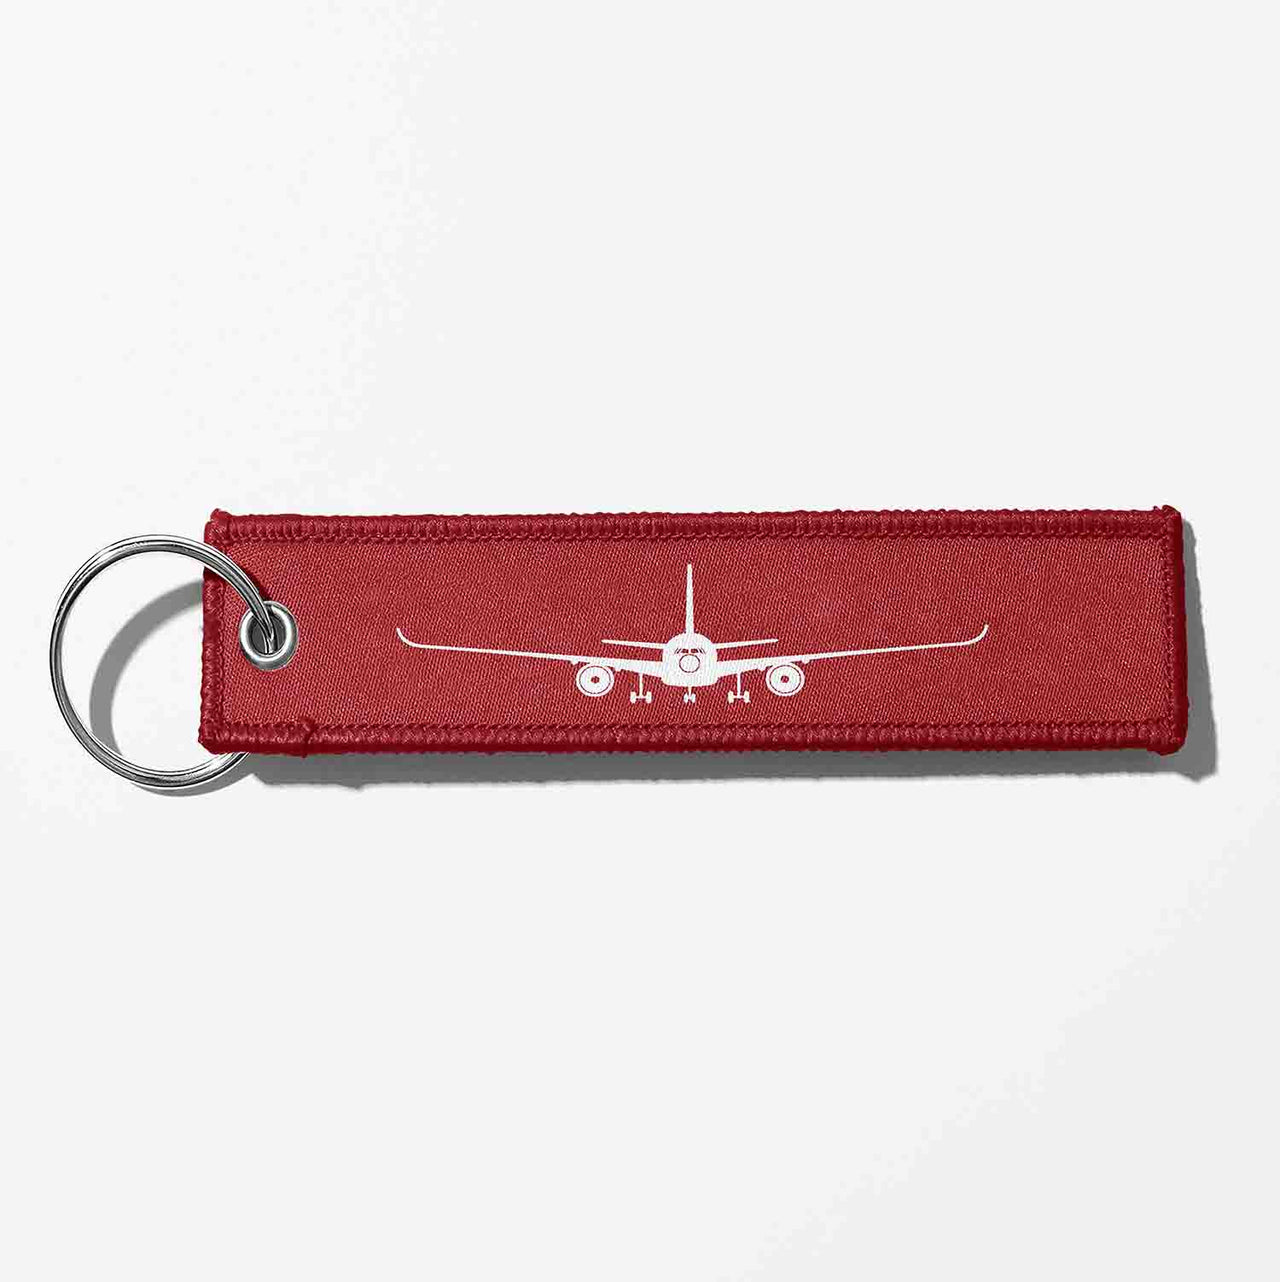 Airbus A350 Silhouette Designed Key Chains